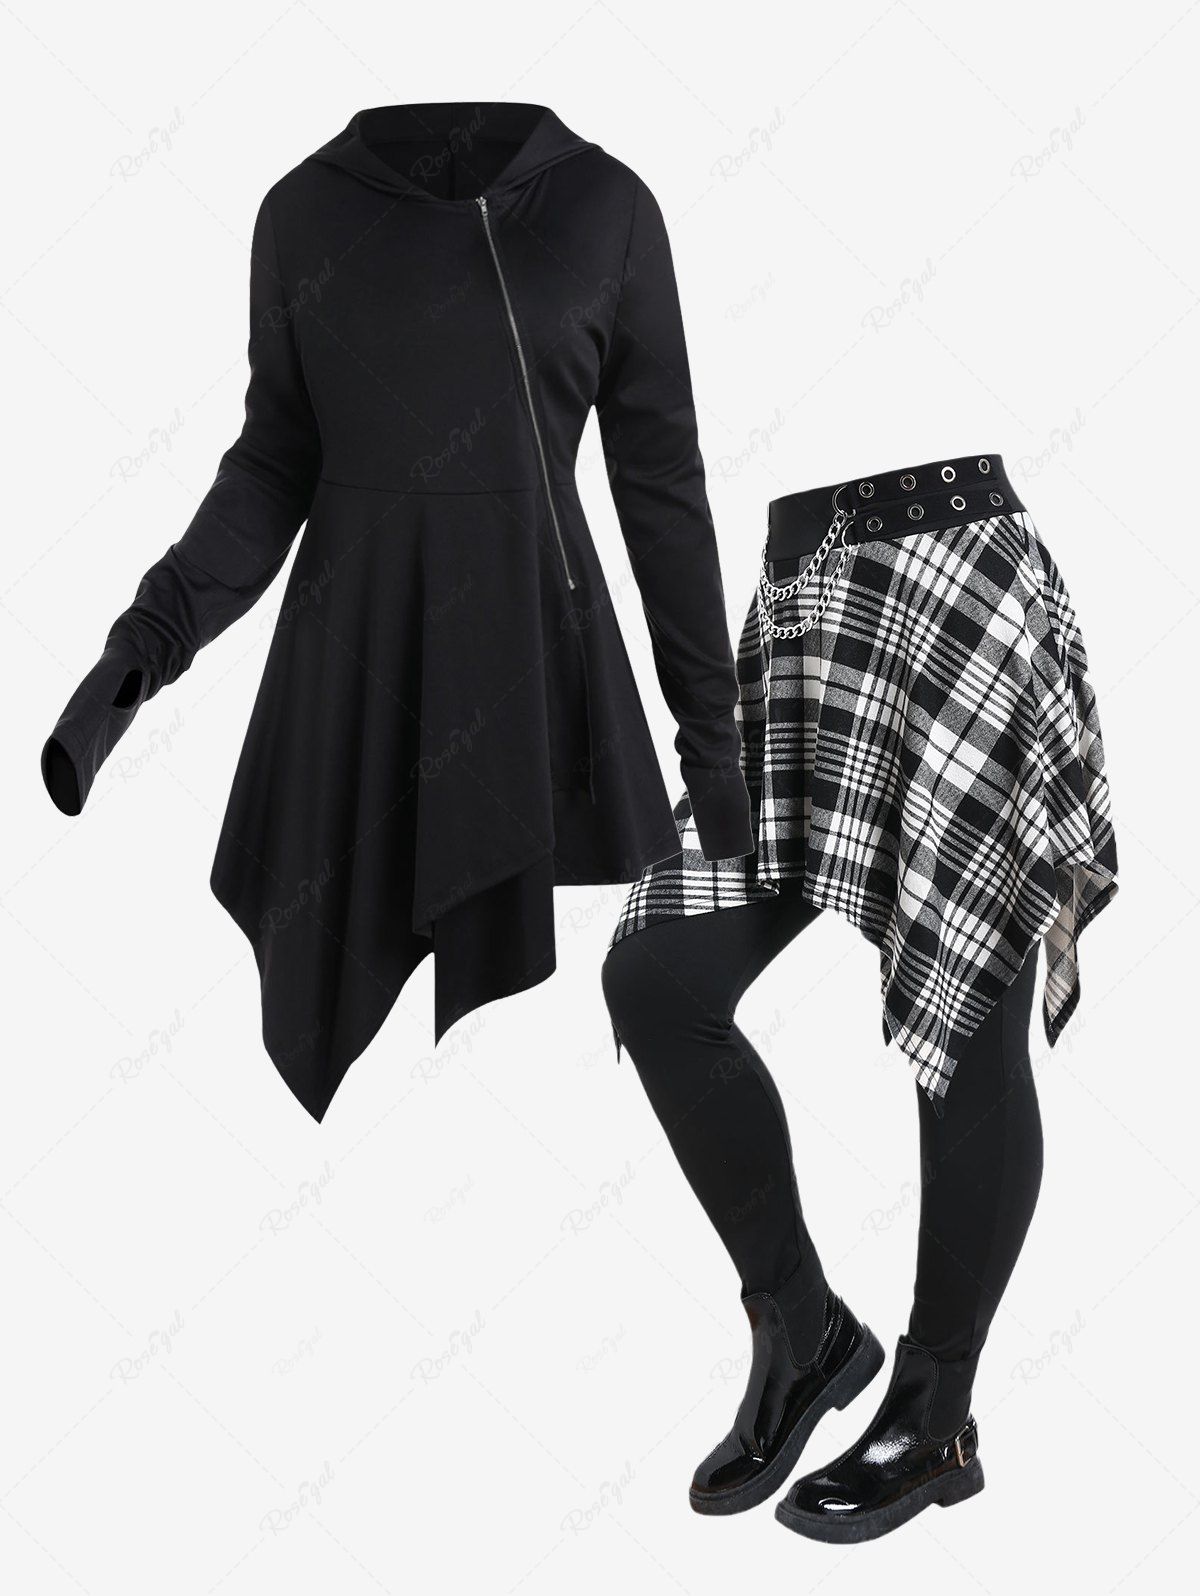 Fancy Gothic Hooded Oblique Zipper Asymmetric Coat and Chain Grommet Embellish Checked Skirted Leggings Outfit  